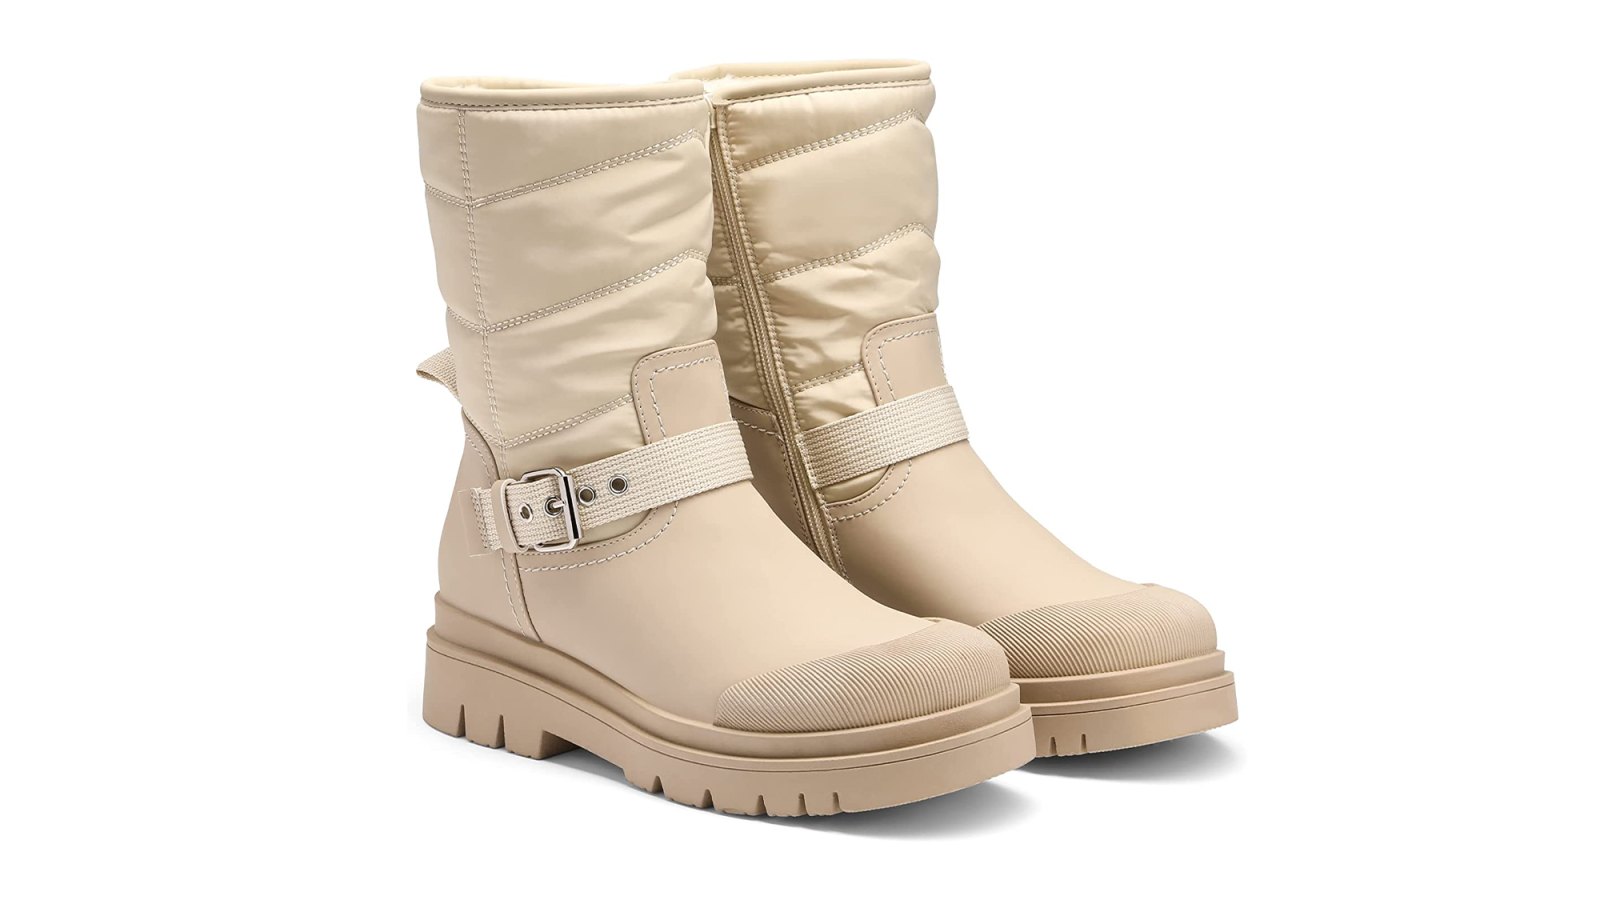 DREAM-PAIRS-Women's-Fur-Lined-Waterproof-Snow-Boots